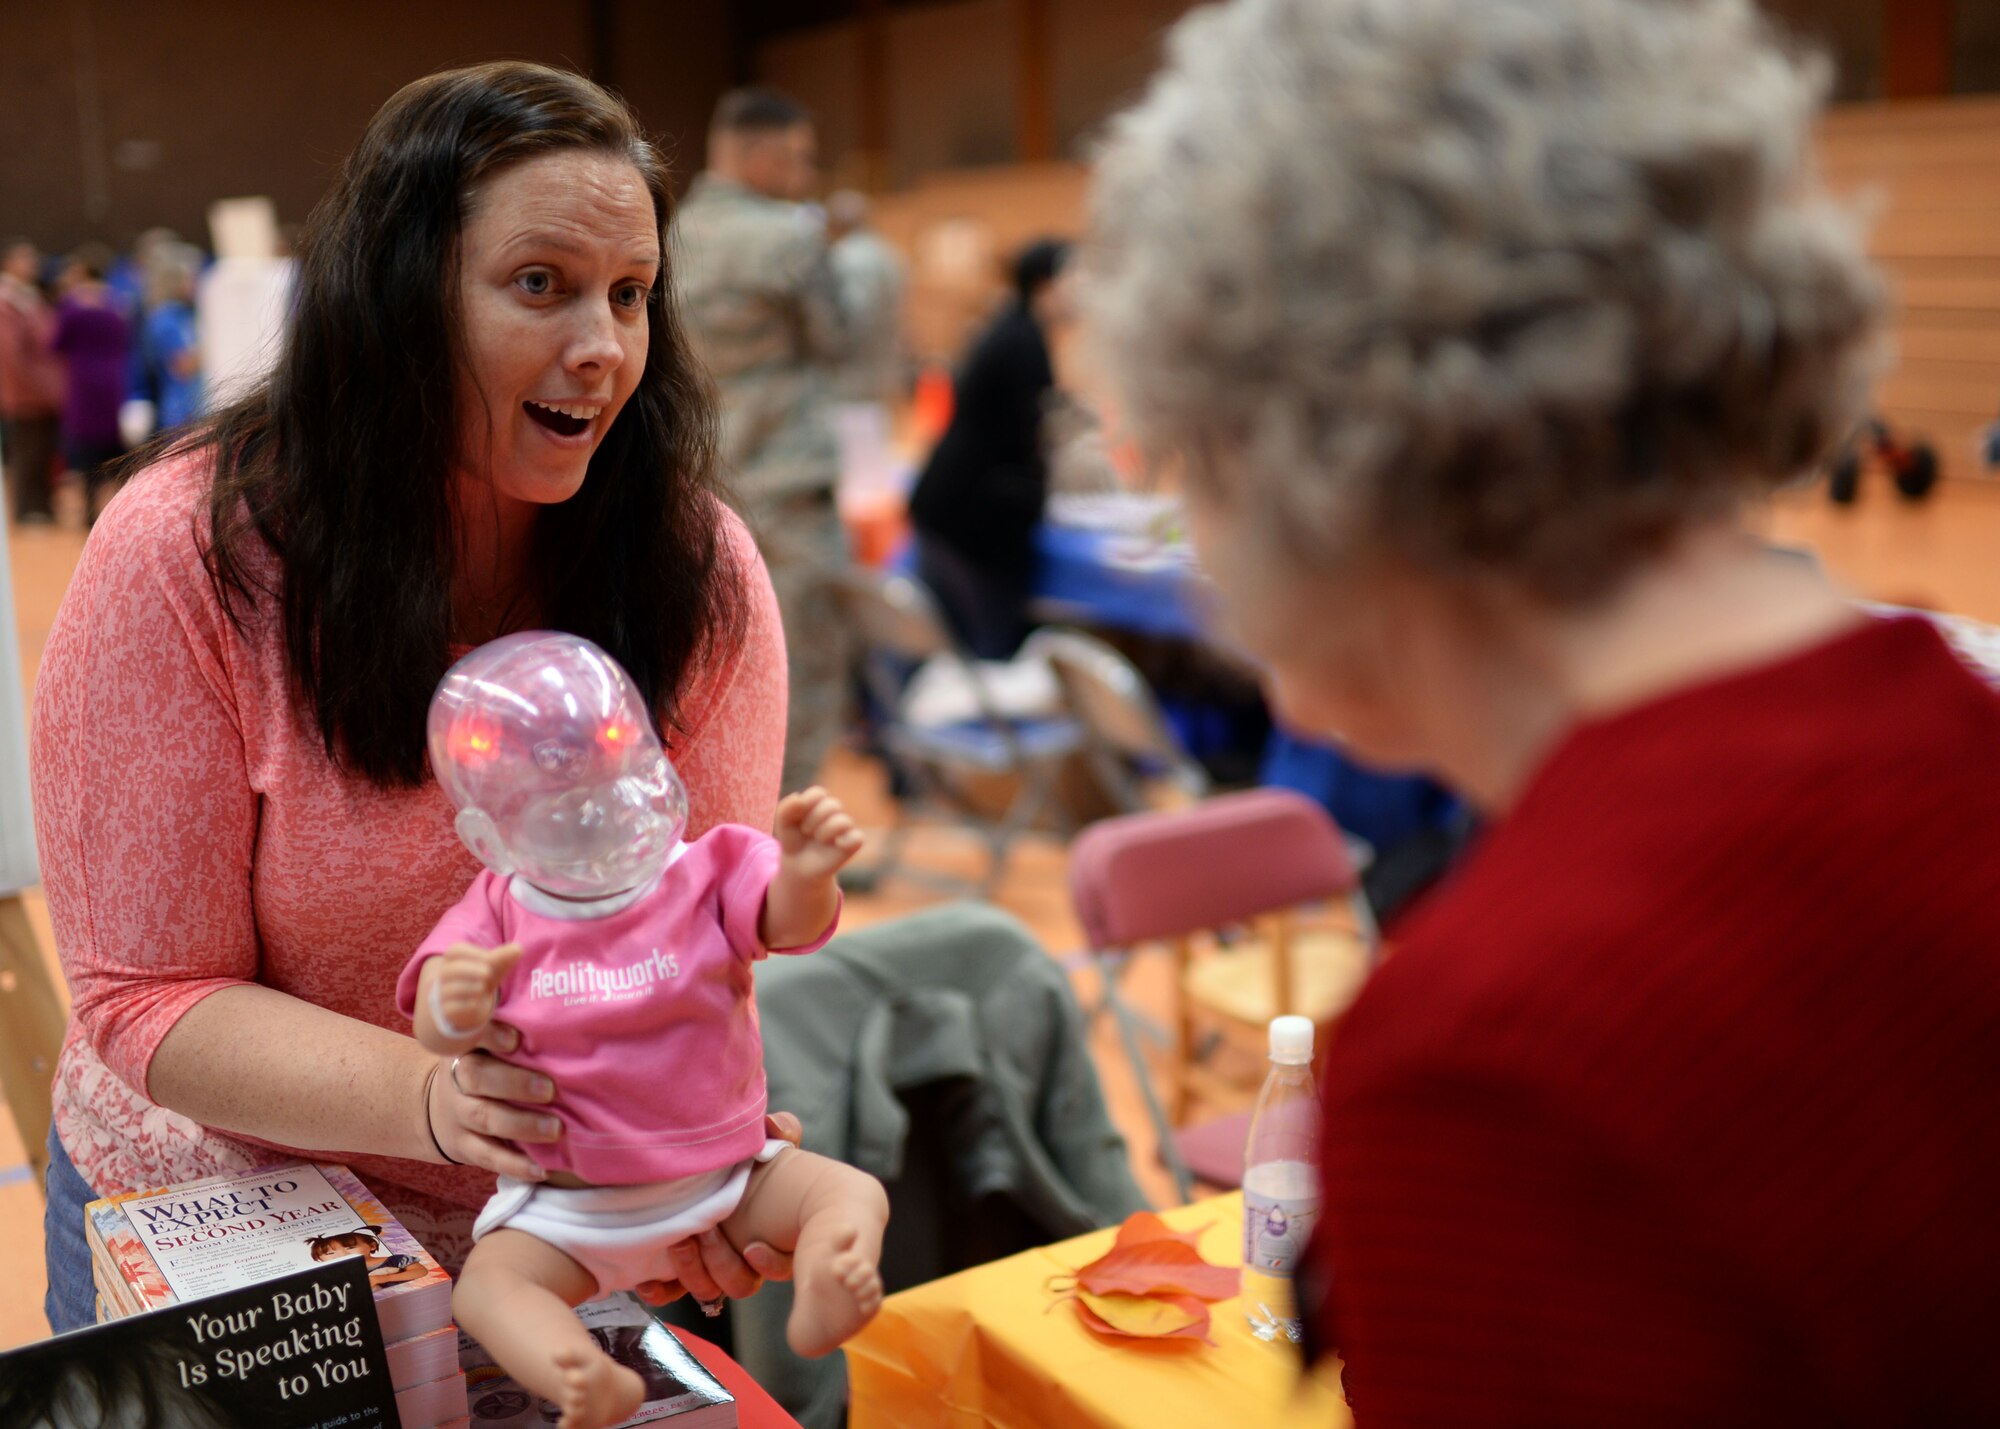 Tara Coenen, 52nd Medical Operations Squadron New Parent Support Program technician and registered nurse, demonstrates a RealityWorks shaken baby simulator during a 52nd Medical Group Fall Harvest Health Fair Nov. 5, 2014. The simulator lights up when shaken in three different areas of the brain, which represent how even one shake to a baby can permanently damage brain functions. (U.S. Air Force photo by Staff Sgt. Daryl Knee/Released)